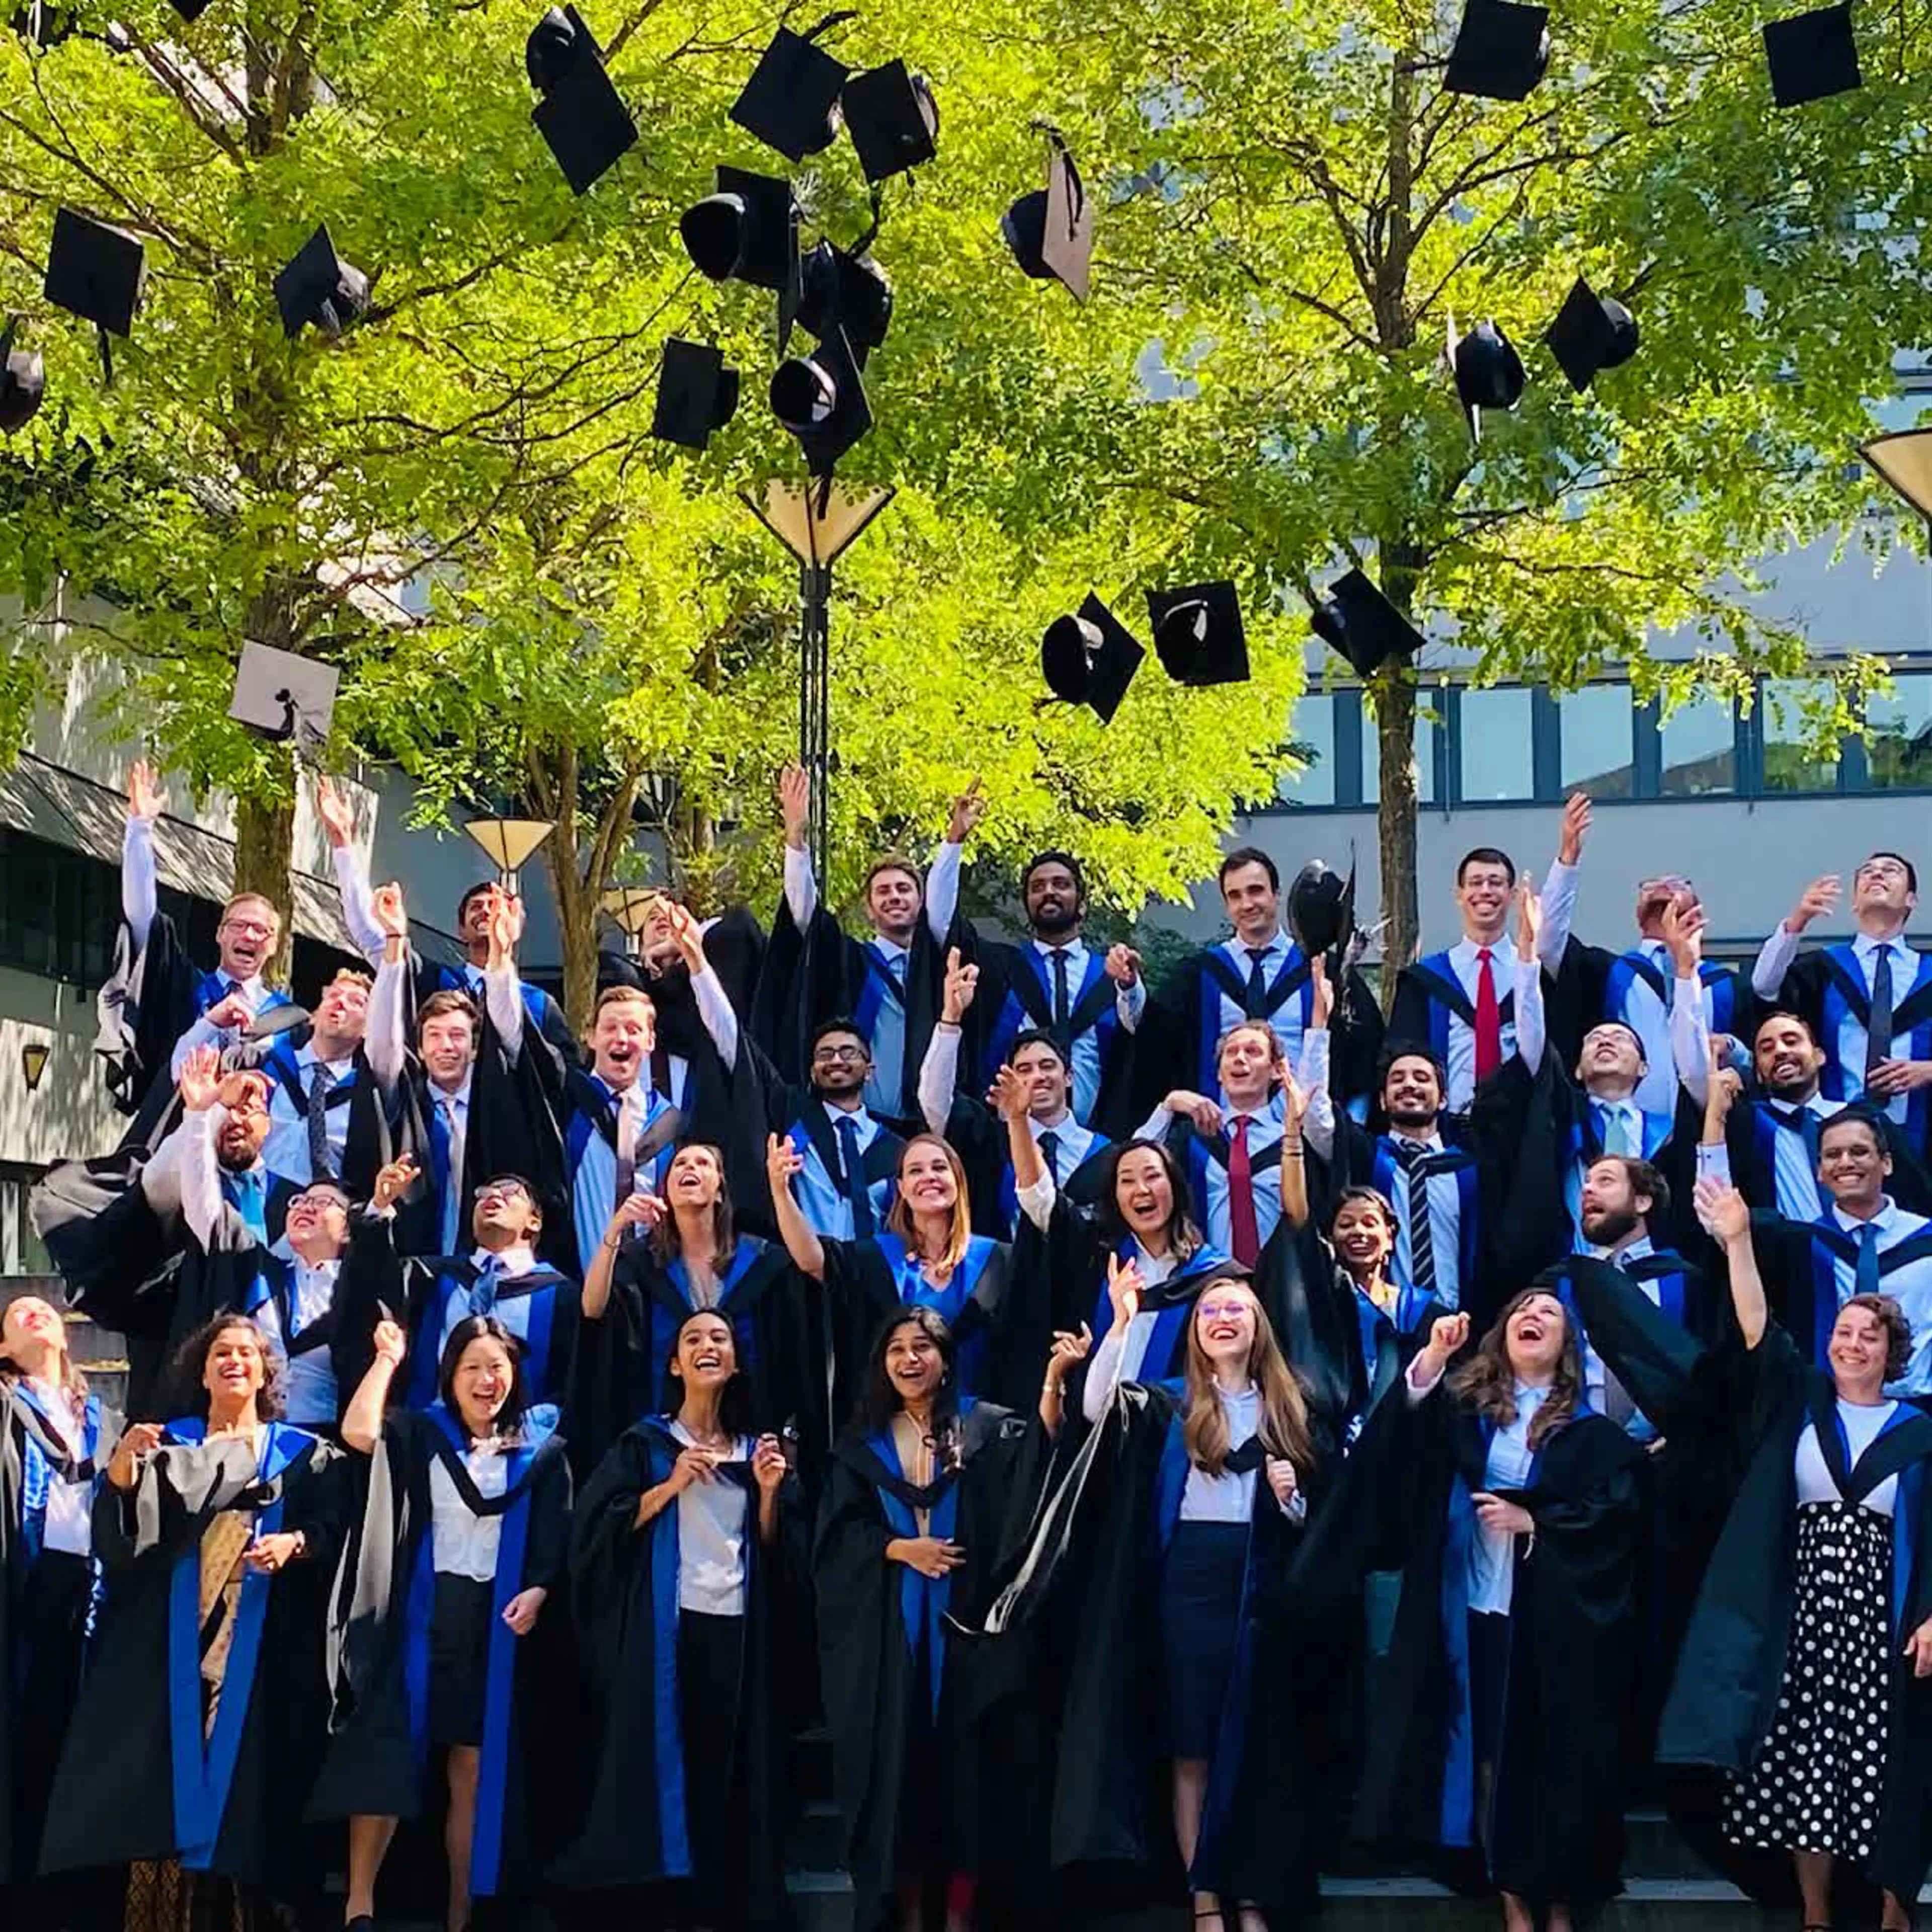 CBS Full-Time MBA students at graduation